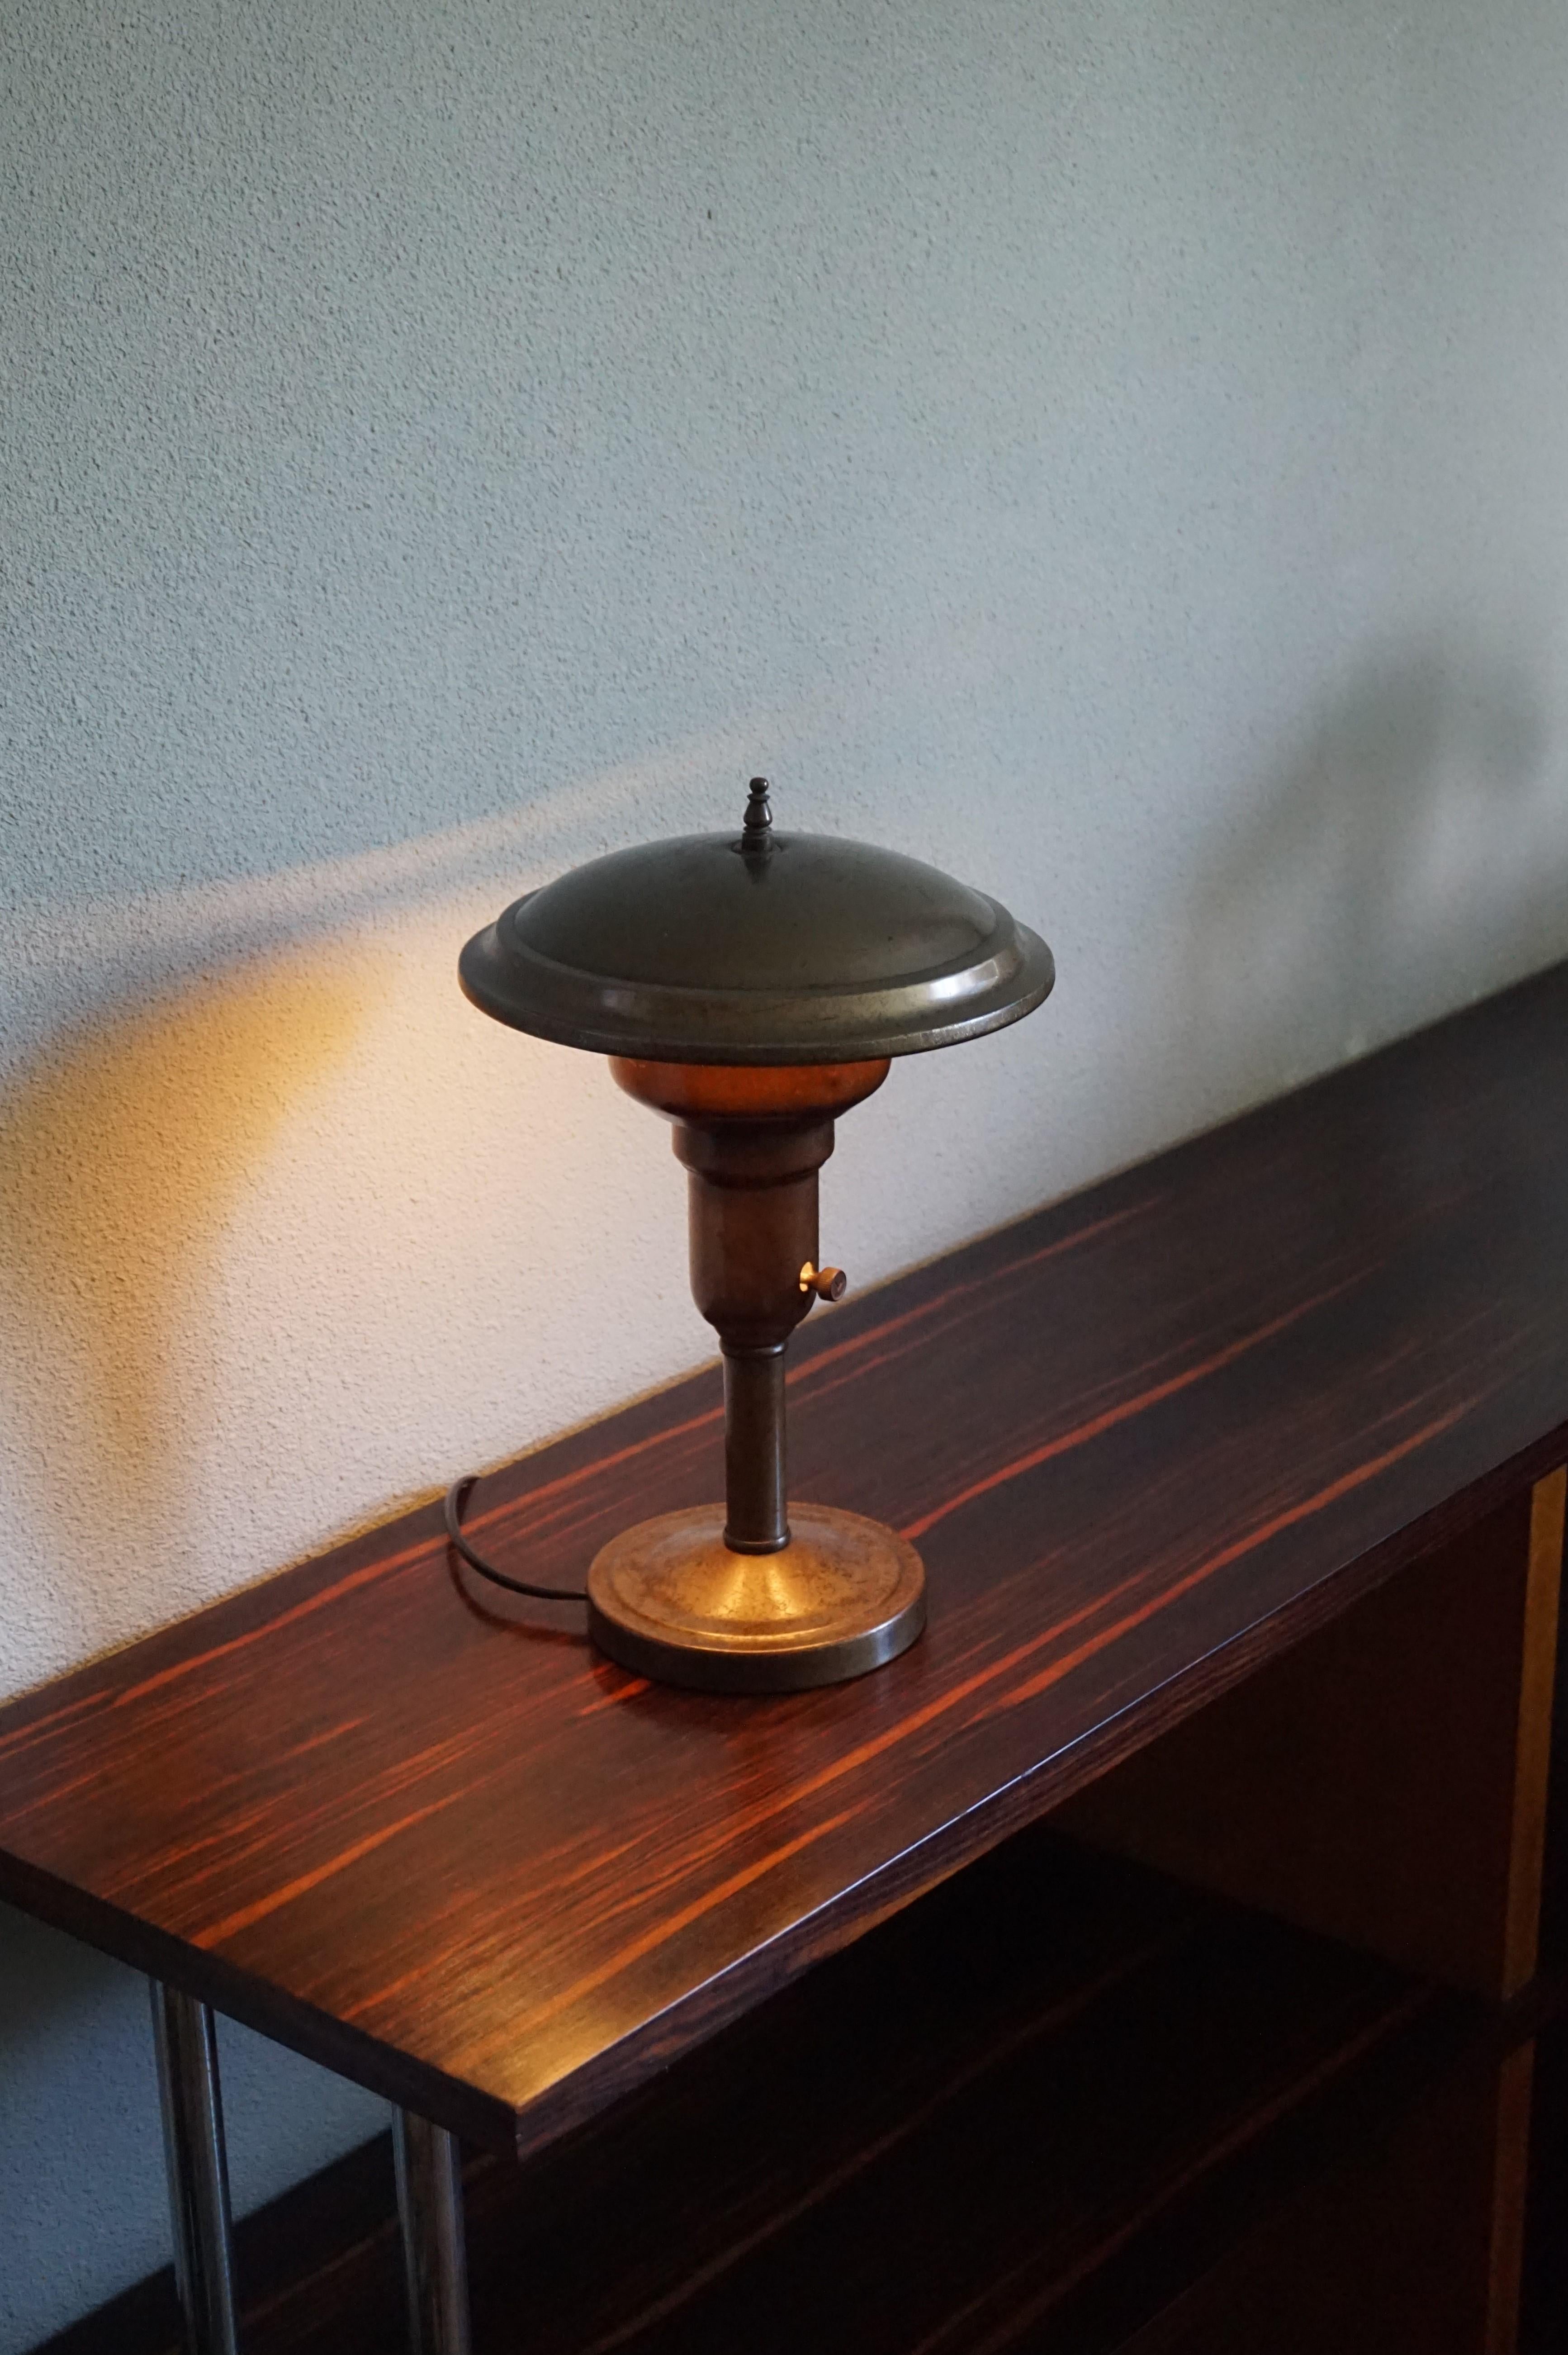 Practical size Art Deco desk lamp with a wonderful look and feel.

There is something about table lamps from the past that you just don't find in modern lamps. If you don't have the right eye than this particular 1920s desk lamp might look 'simple'.